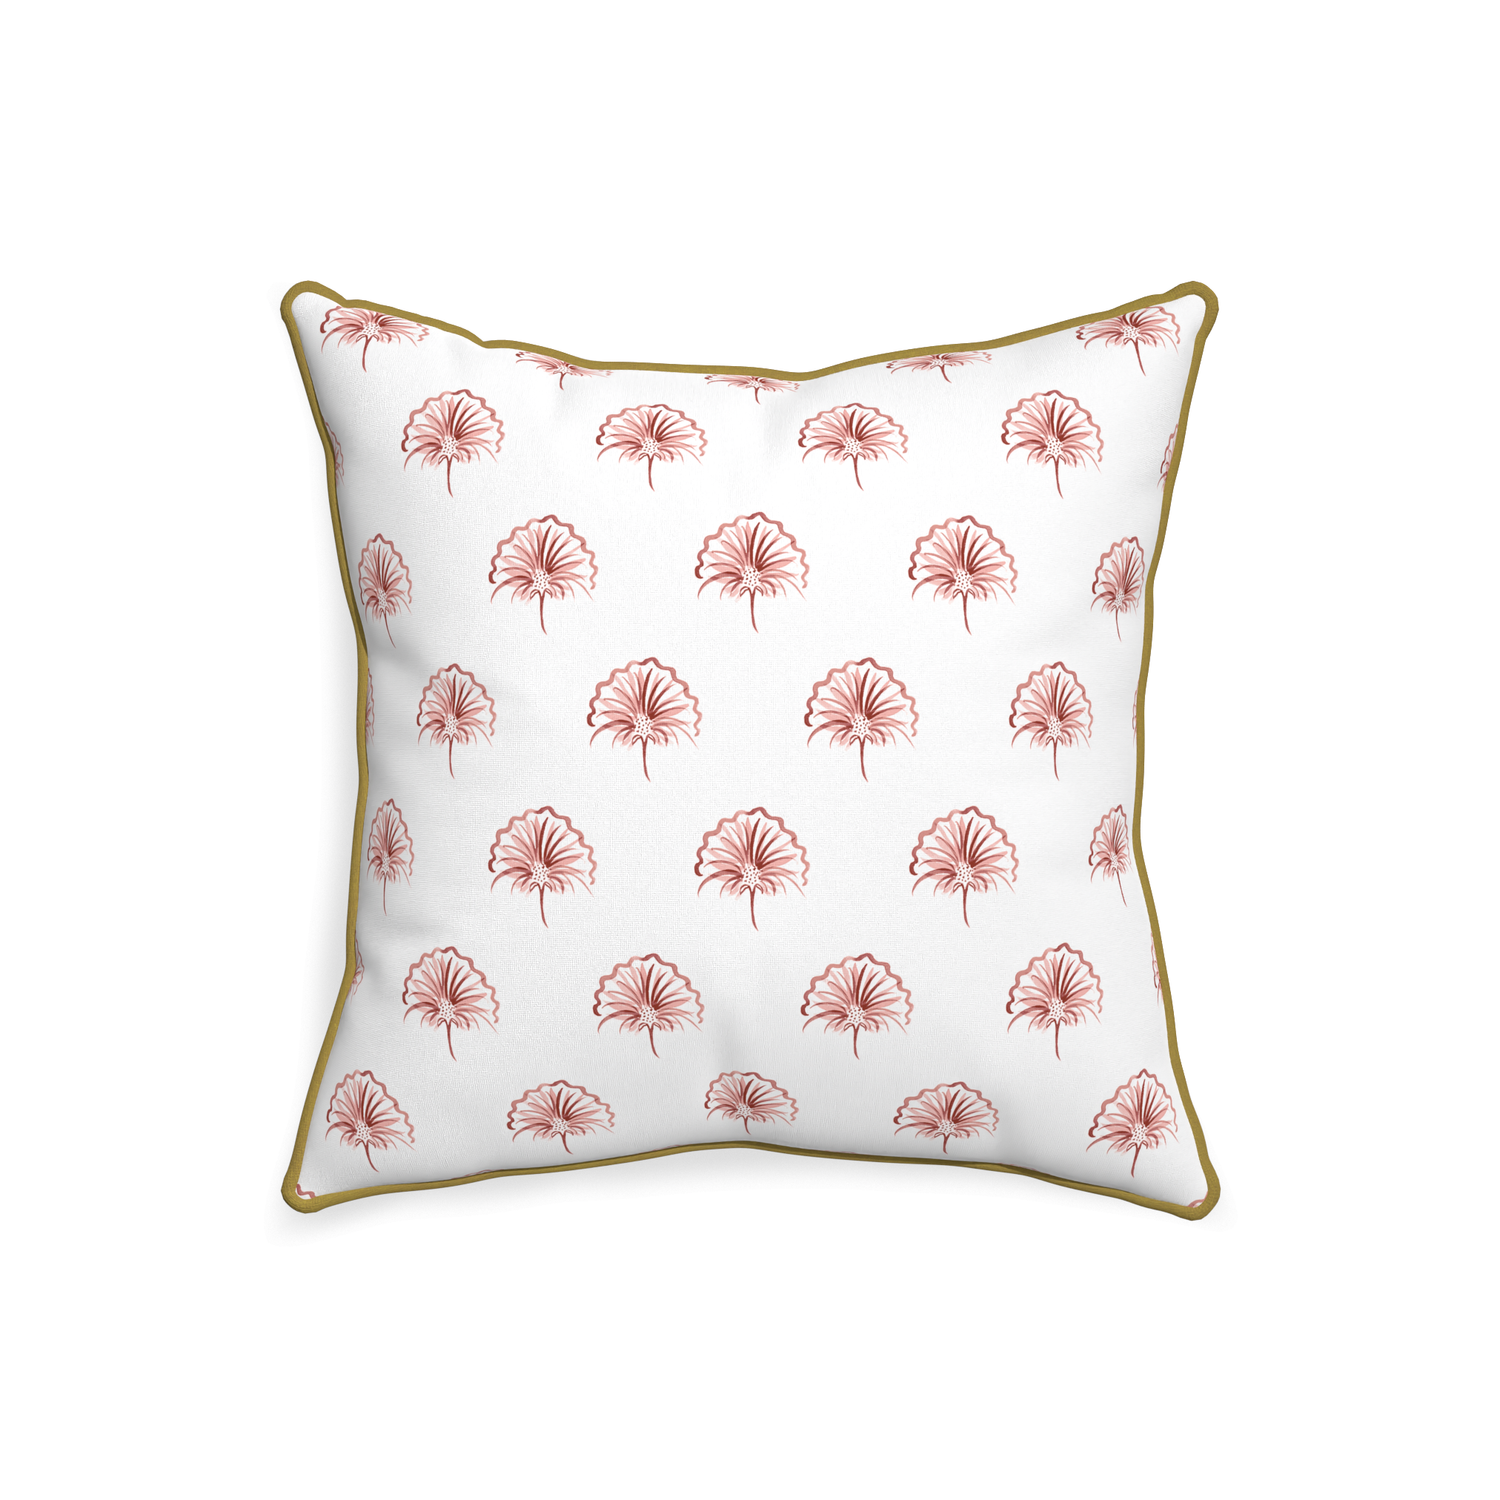 20-square penelope rose custom floral pinkpillow with c piping on white background